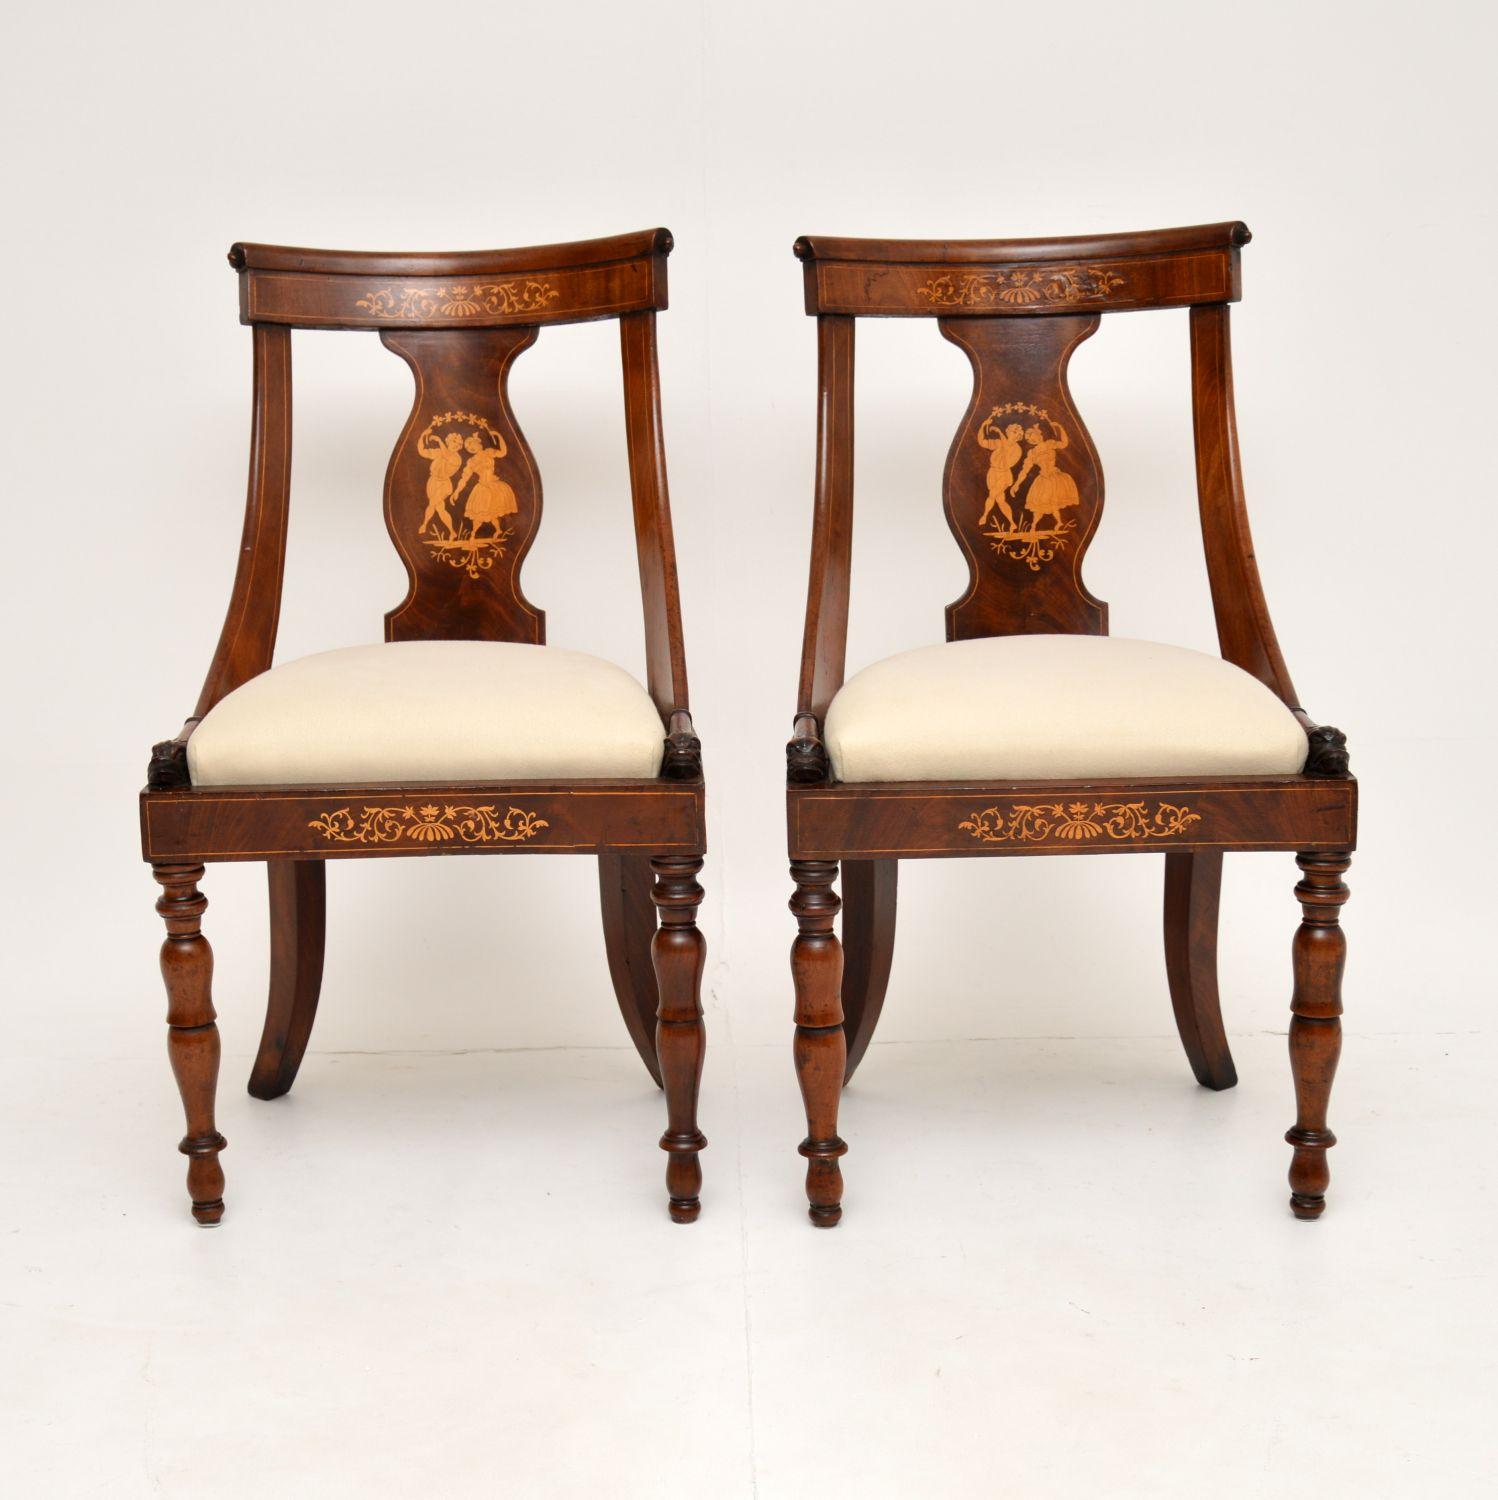 Neoclassical Pair of Antique Inlaid Neo Classical Side Chairs